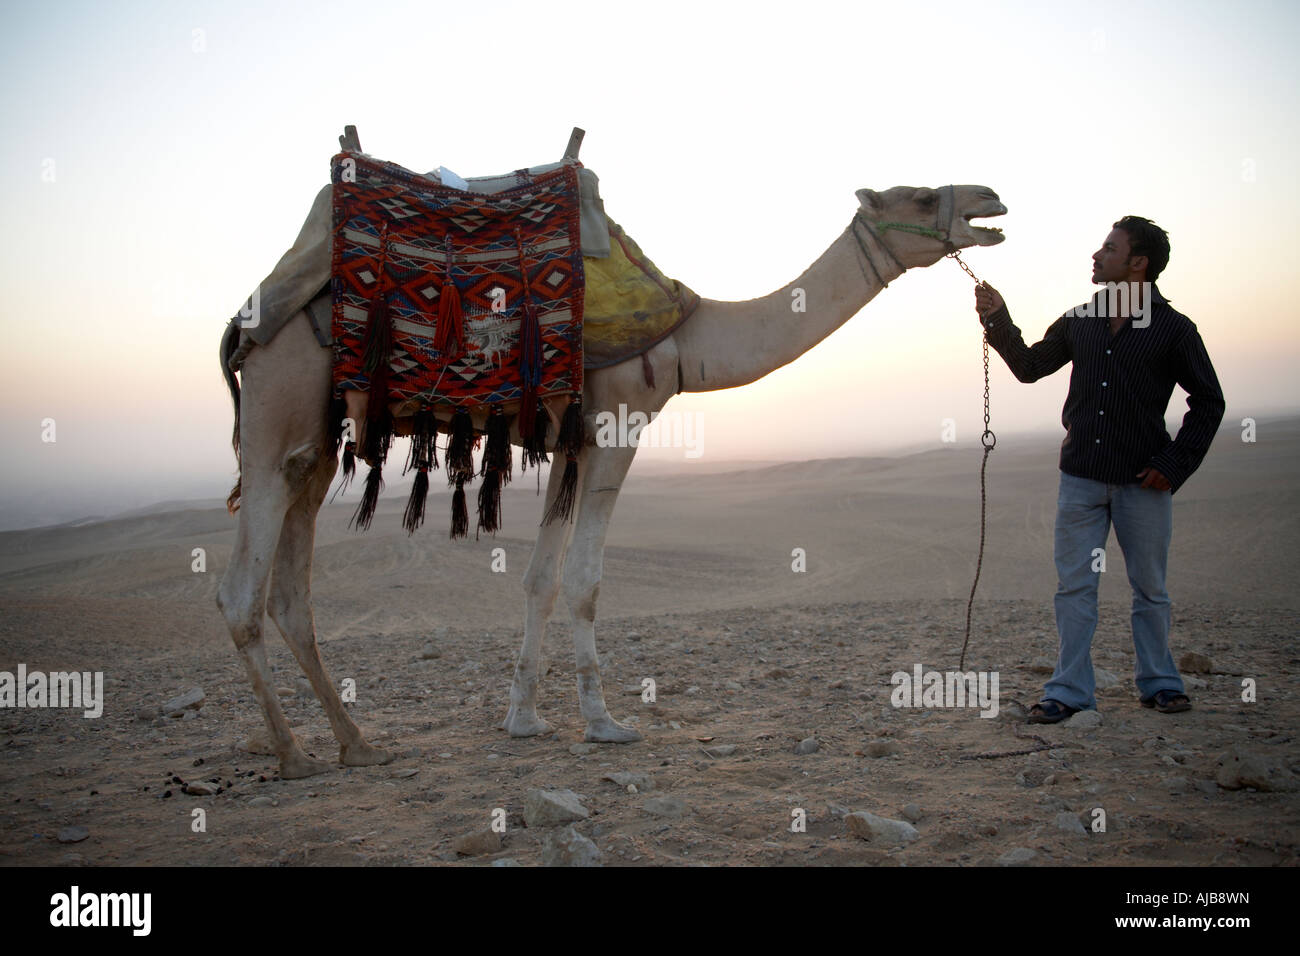 Guide talking to a camel in the stony desert in early morning sunrise Giza Cairo Egypt Africa Amusing funny comic humourous ani Stock Photo